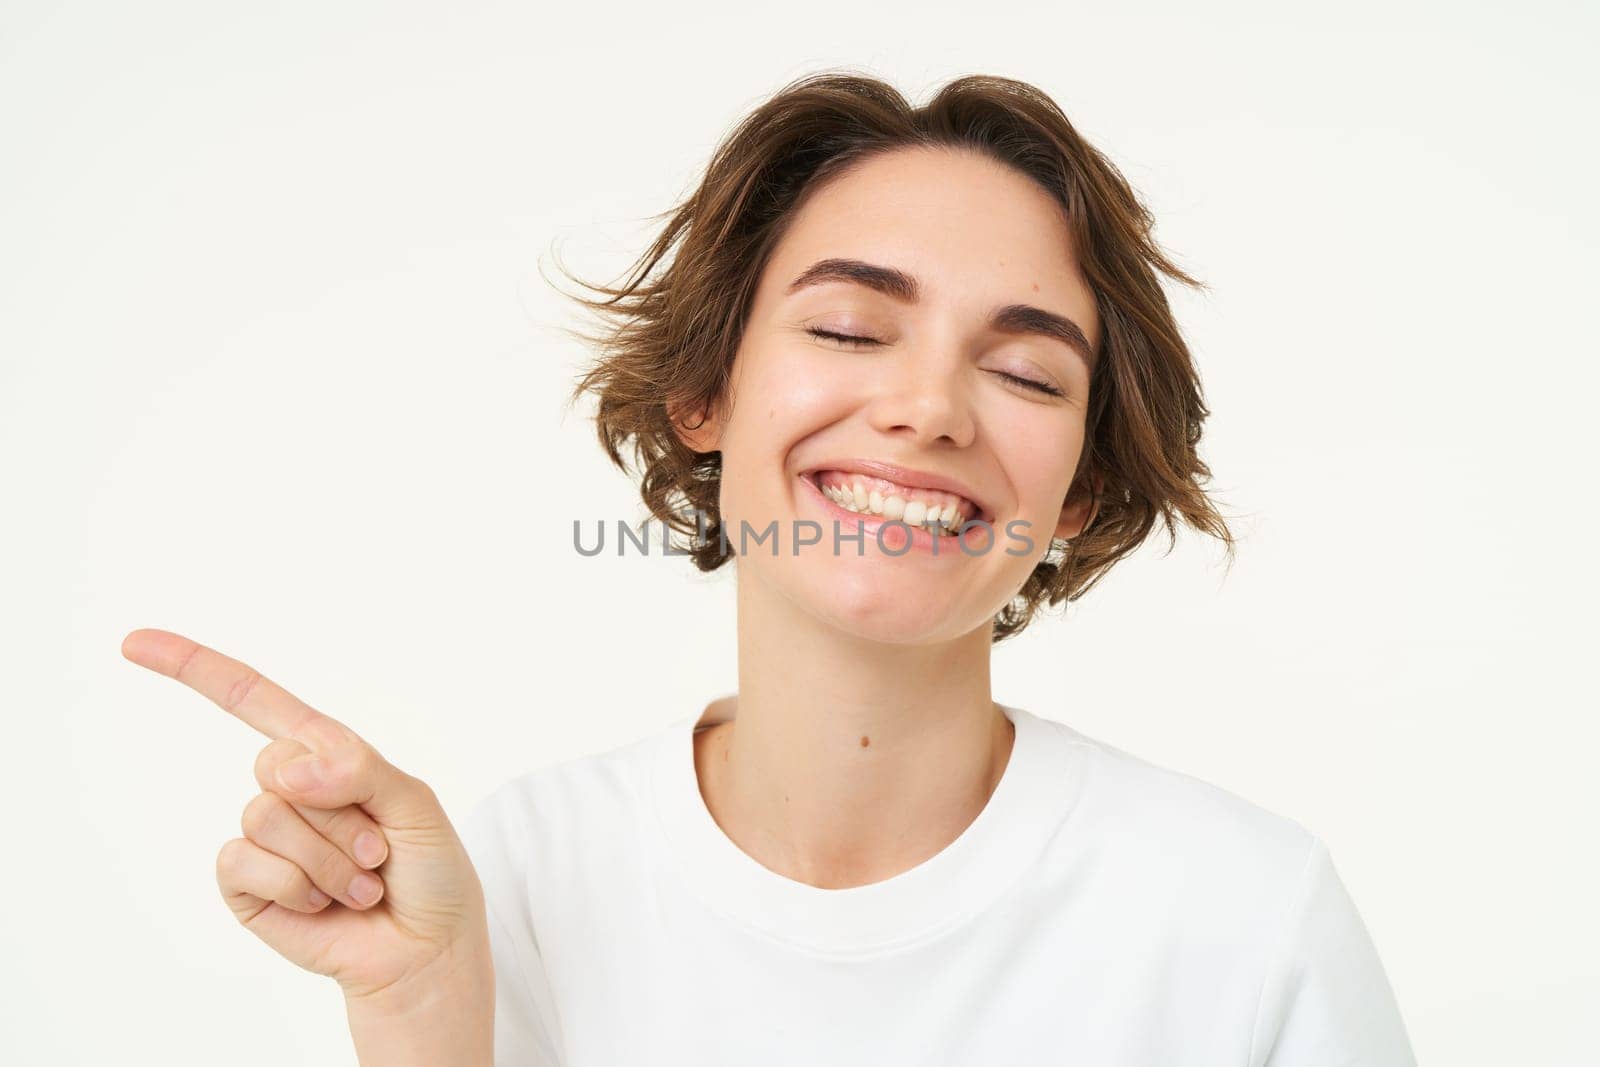 Portrait of candid young woman with short curly hair, pointing finger left at banner, showing product advertisement and smiling, posing over white background.